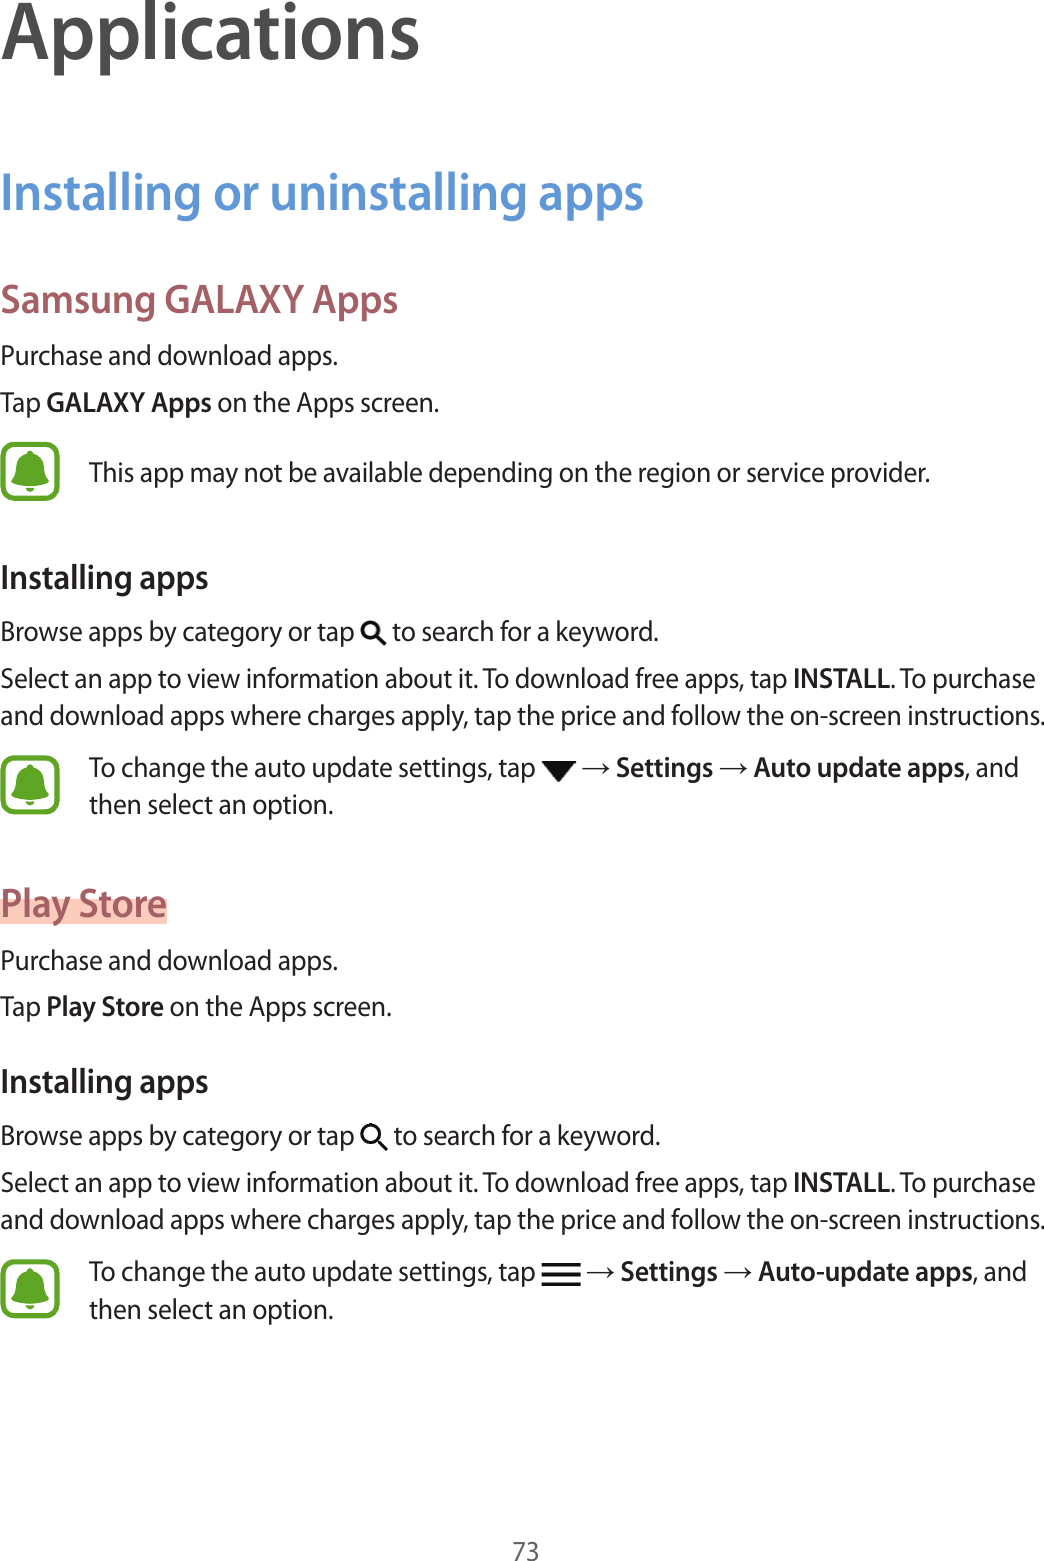 73ApplicationsInstalling or uninstalling appsSamsung GALAXY AppsPur chase and do wnload apps .Tap GALAXY Apps on the Apps screen.This app may not be a vailable depending on the r eg ion or service provider.Installing appsBrow se apps b y cat egory or tap   to search for a keywor d .Select an app to view inf ormation about it. To download free apps, tap INSTALL. To purchase and download apps where char ges apply, tap the price and f ollo w the on-scr een instructions.To change the auto update settings , tap    Settings  Aut o updat e apps, and then select an option.Pla y St orePur chase and do wnload apps .Tap Play St or e on the Apps screen.Installing appsBrow se apps b y cat egory or tap   to search for a keywor d .Select an app to view inf ormation about it. To download free apps, tap INSTALL. To purchase and download apps where char ges apply, tap the price and f ollo w the on-scr een instructions.To change the auto update settings , tap    Settings  Aut o-update apps, and then select an option.